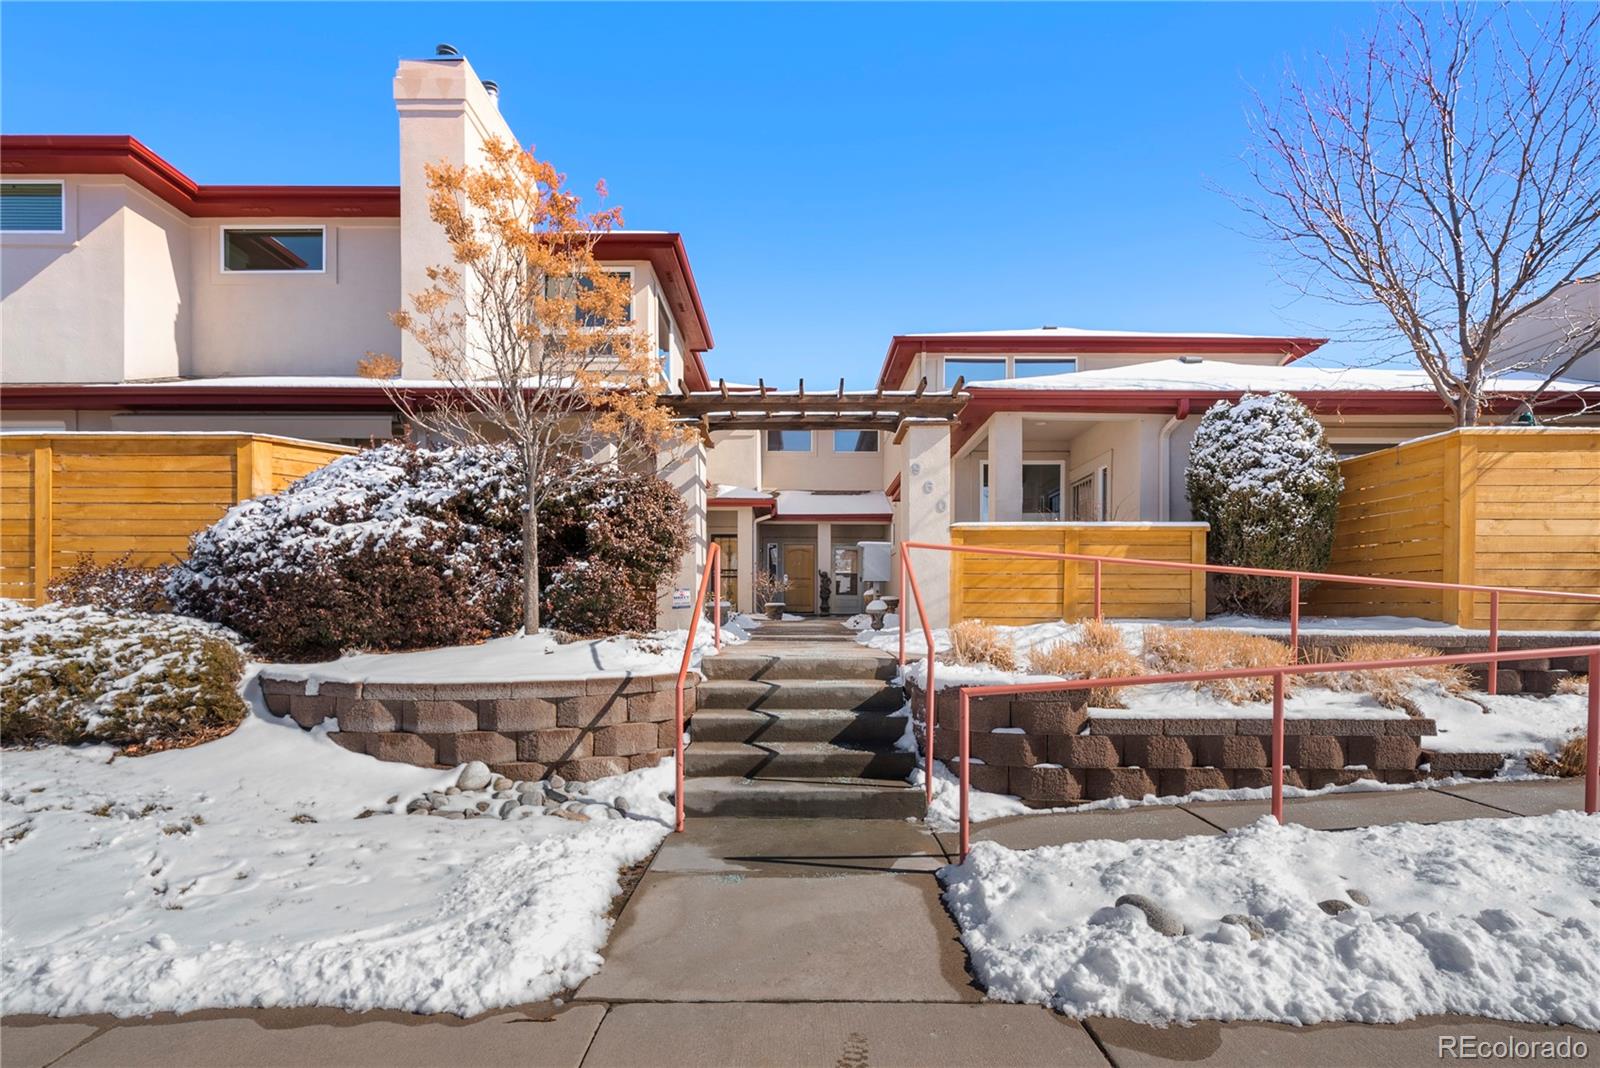 960 s locust street, Denver sold home. Closed on 2024-04-01 for $455,000.